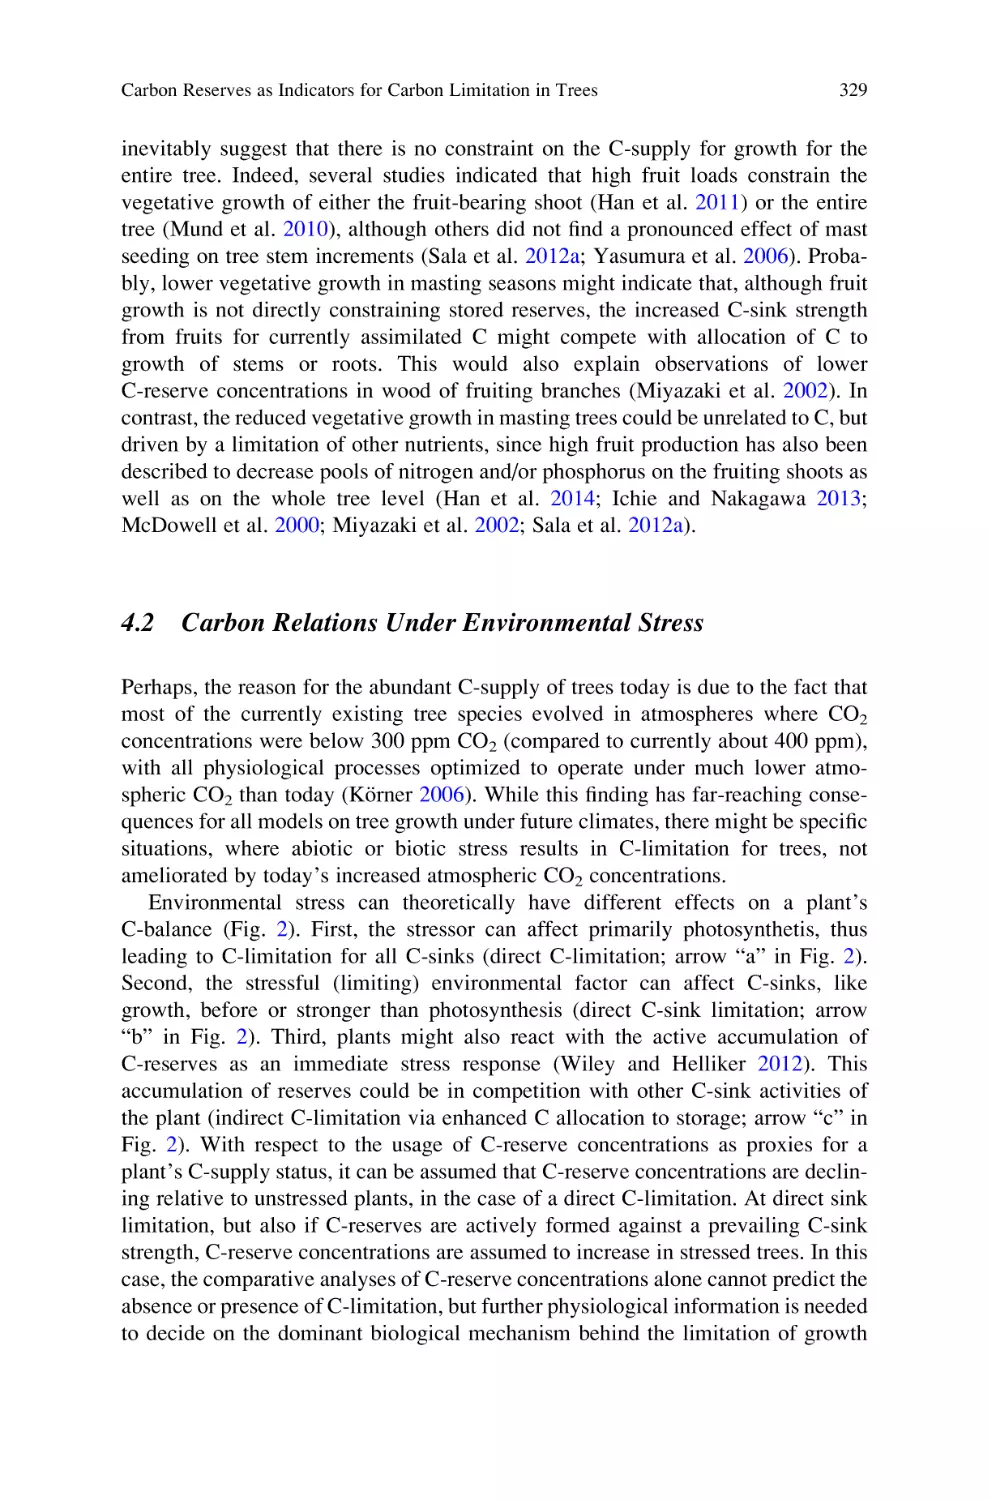 4.2 Carbon Relations Under Environmental Stress